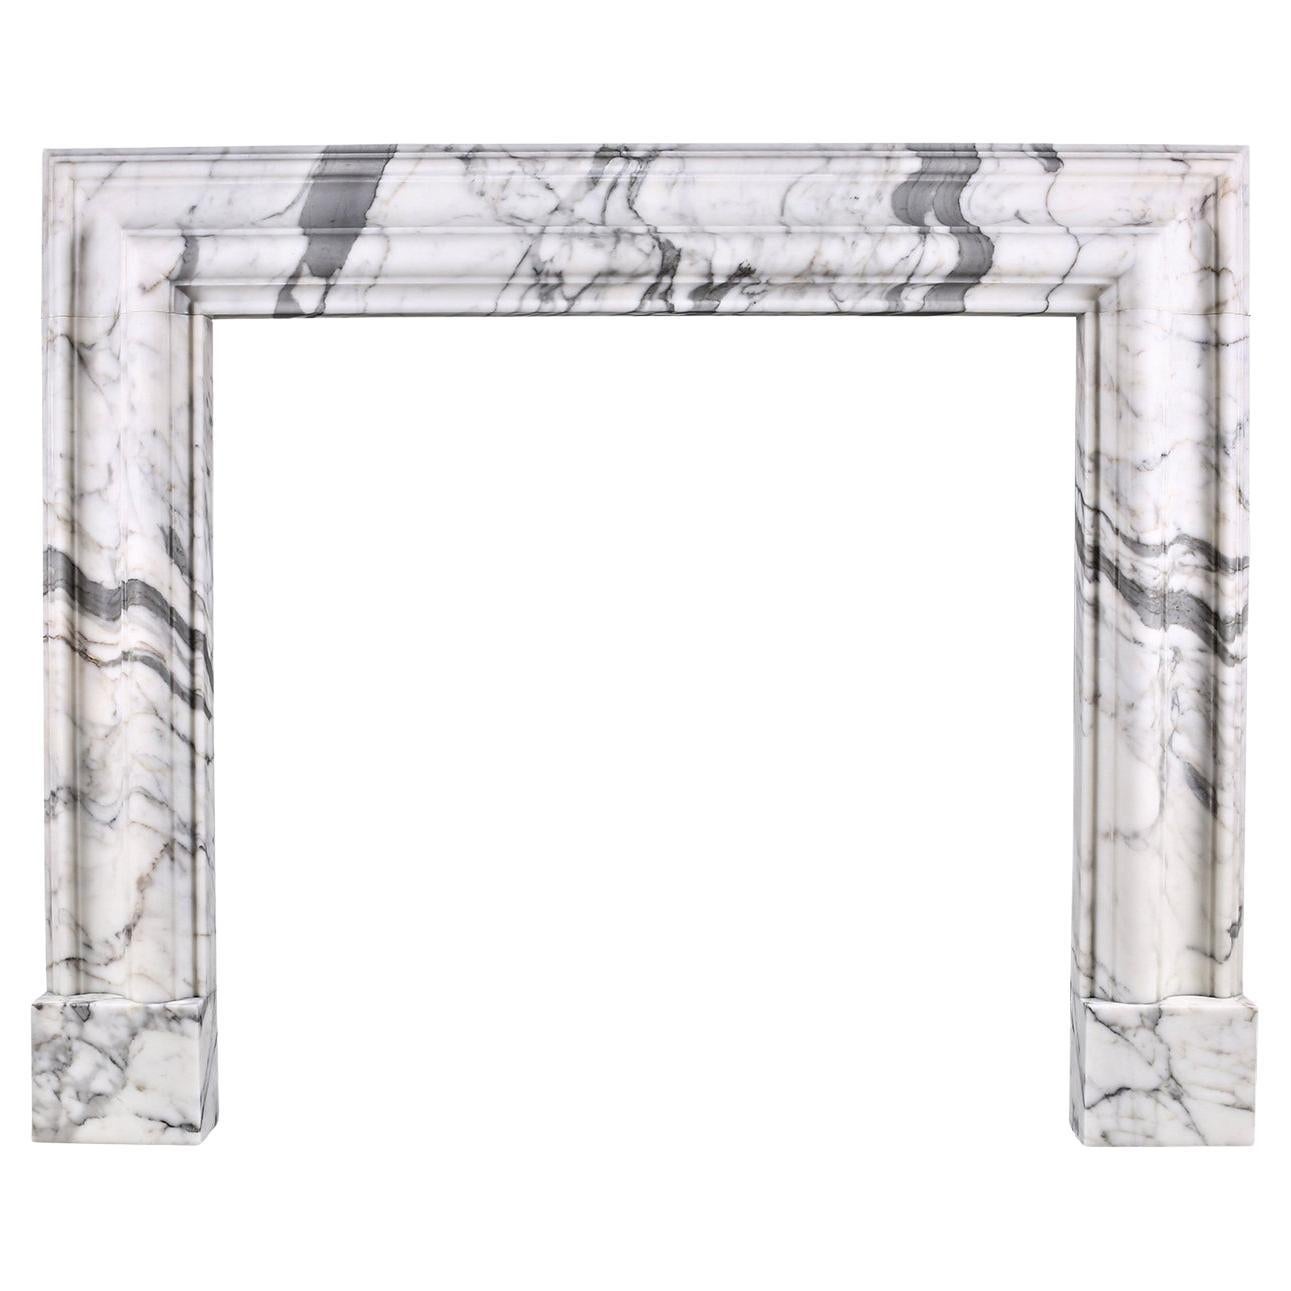 Baroque Bolection Fireplace Mantel in Italian White Statuary Marble For Sale